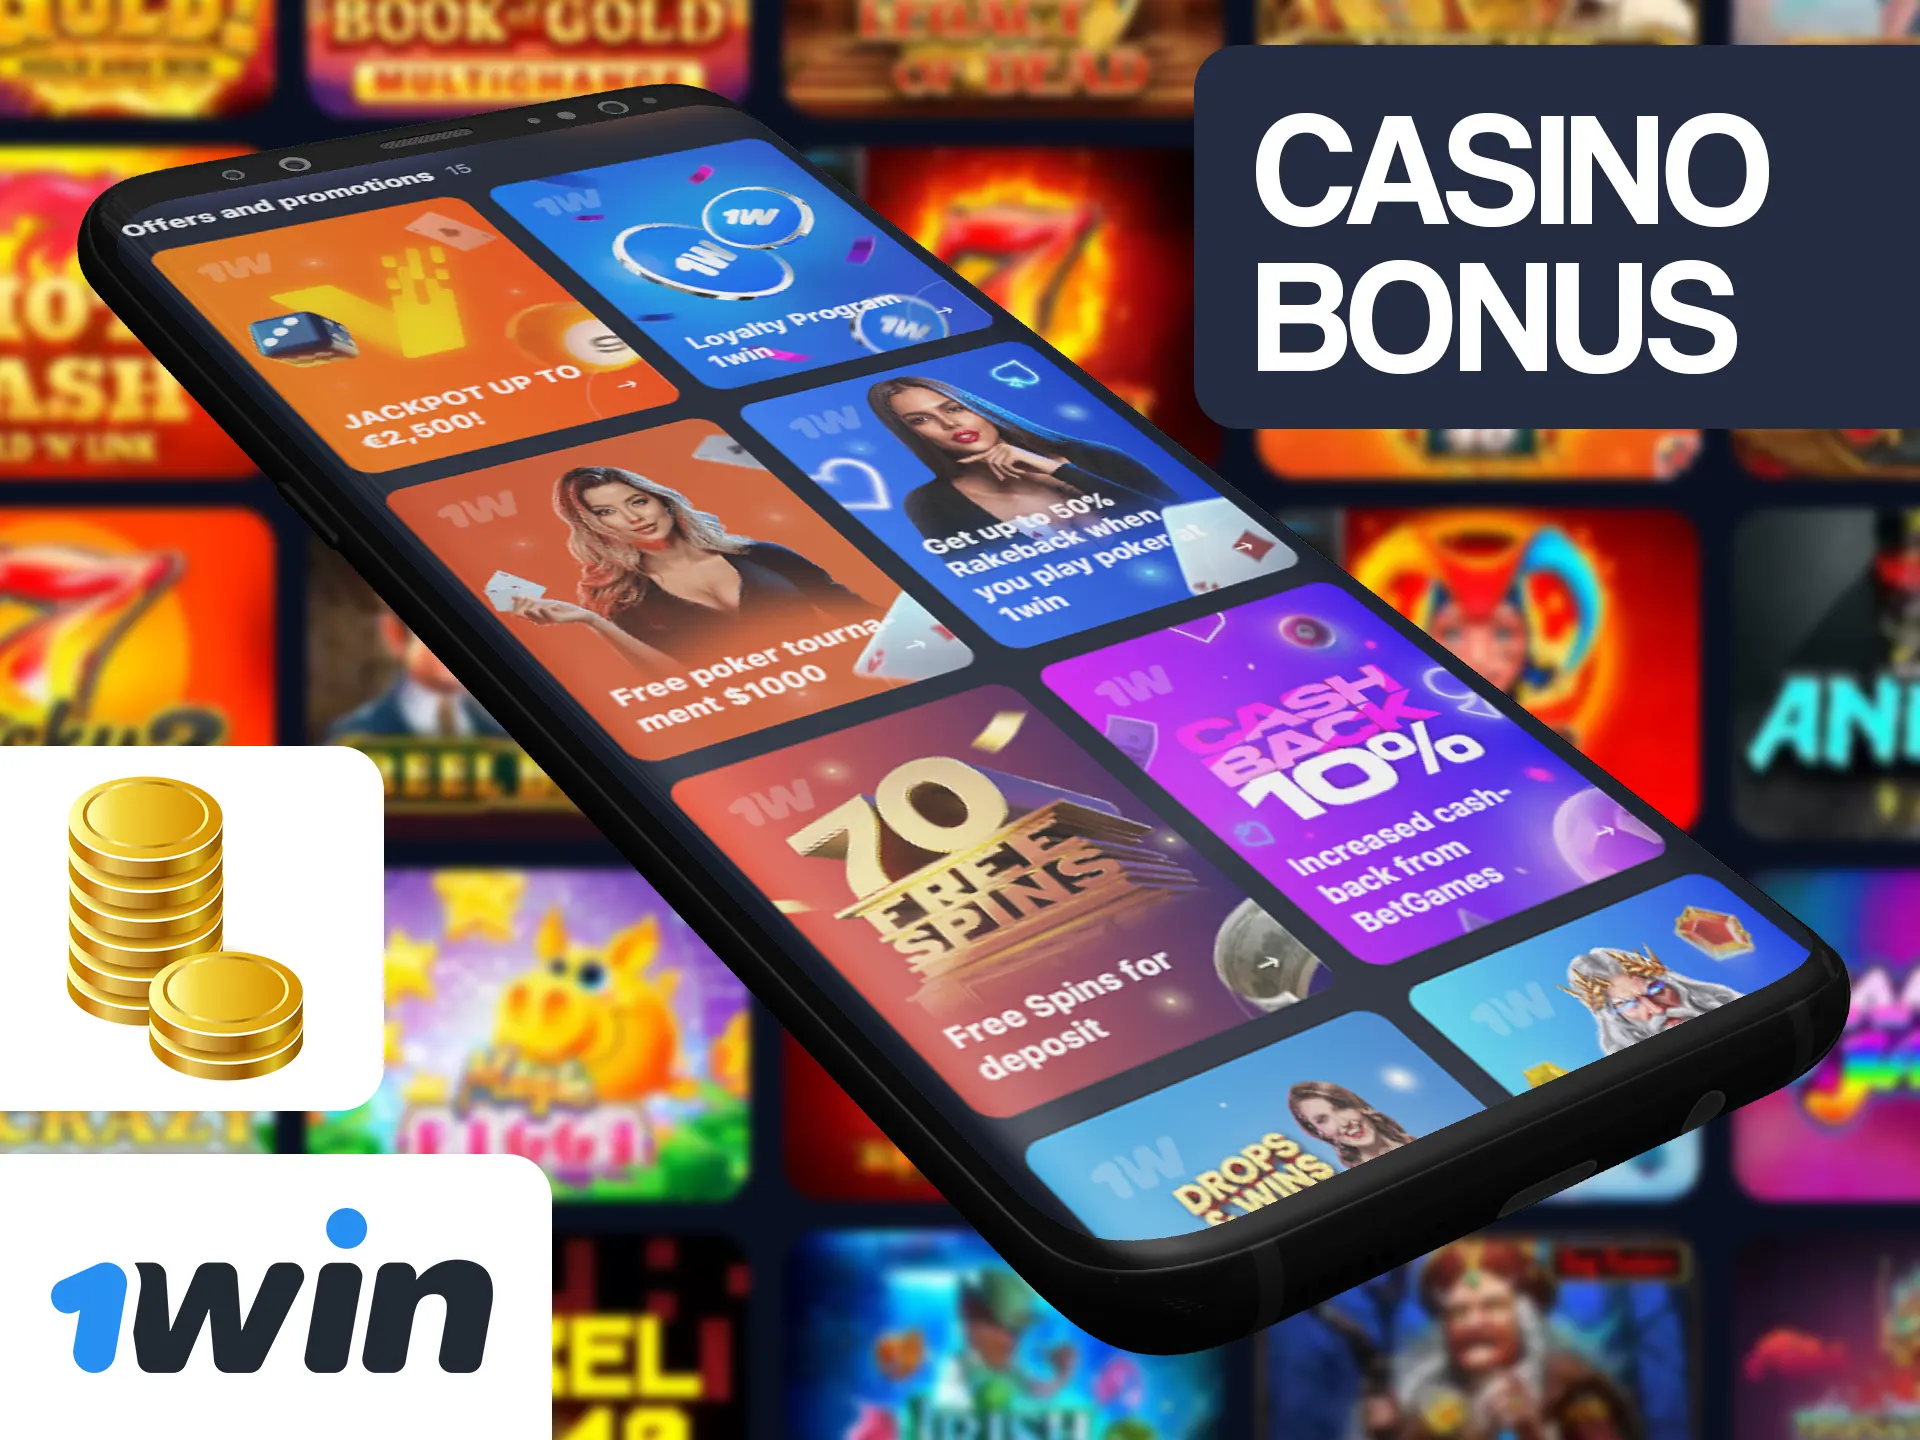 Play 1win casino and get additional bonuses.